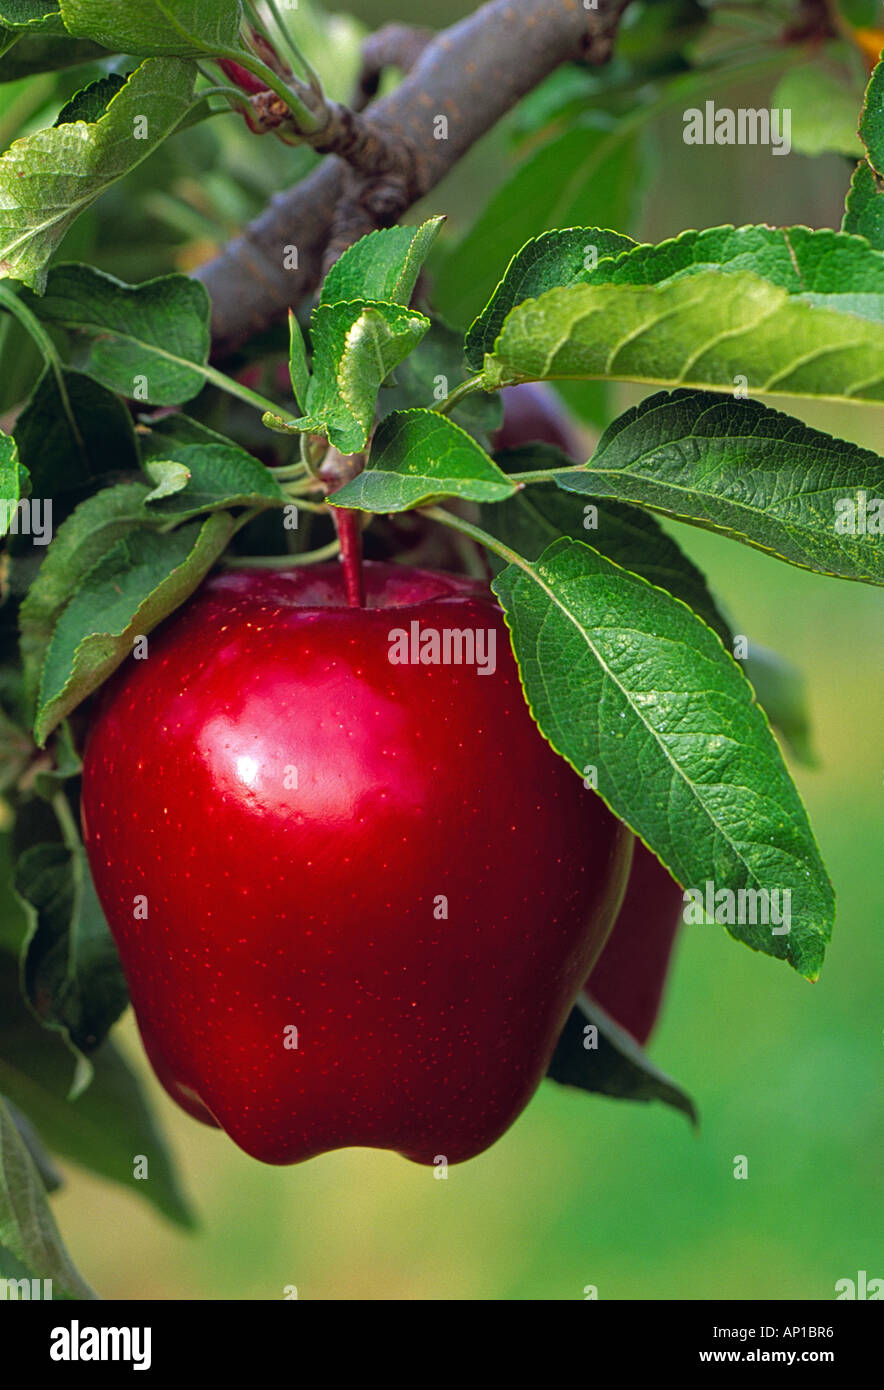 https://c8.alamy.com/comp/AP1BR6/agriculture-mature-red-delicious-apple-on-the-tree-ripe-and-ready-AP1BR6.jpg